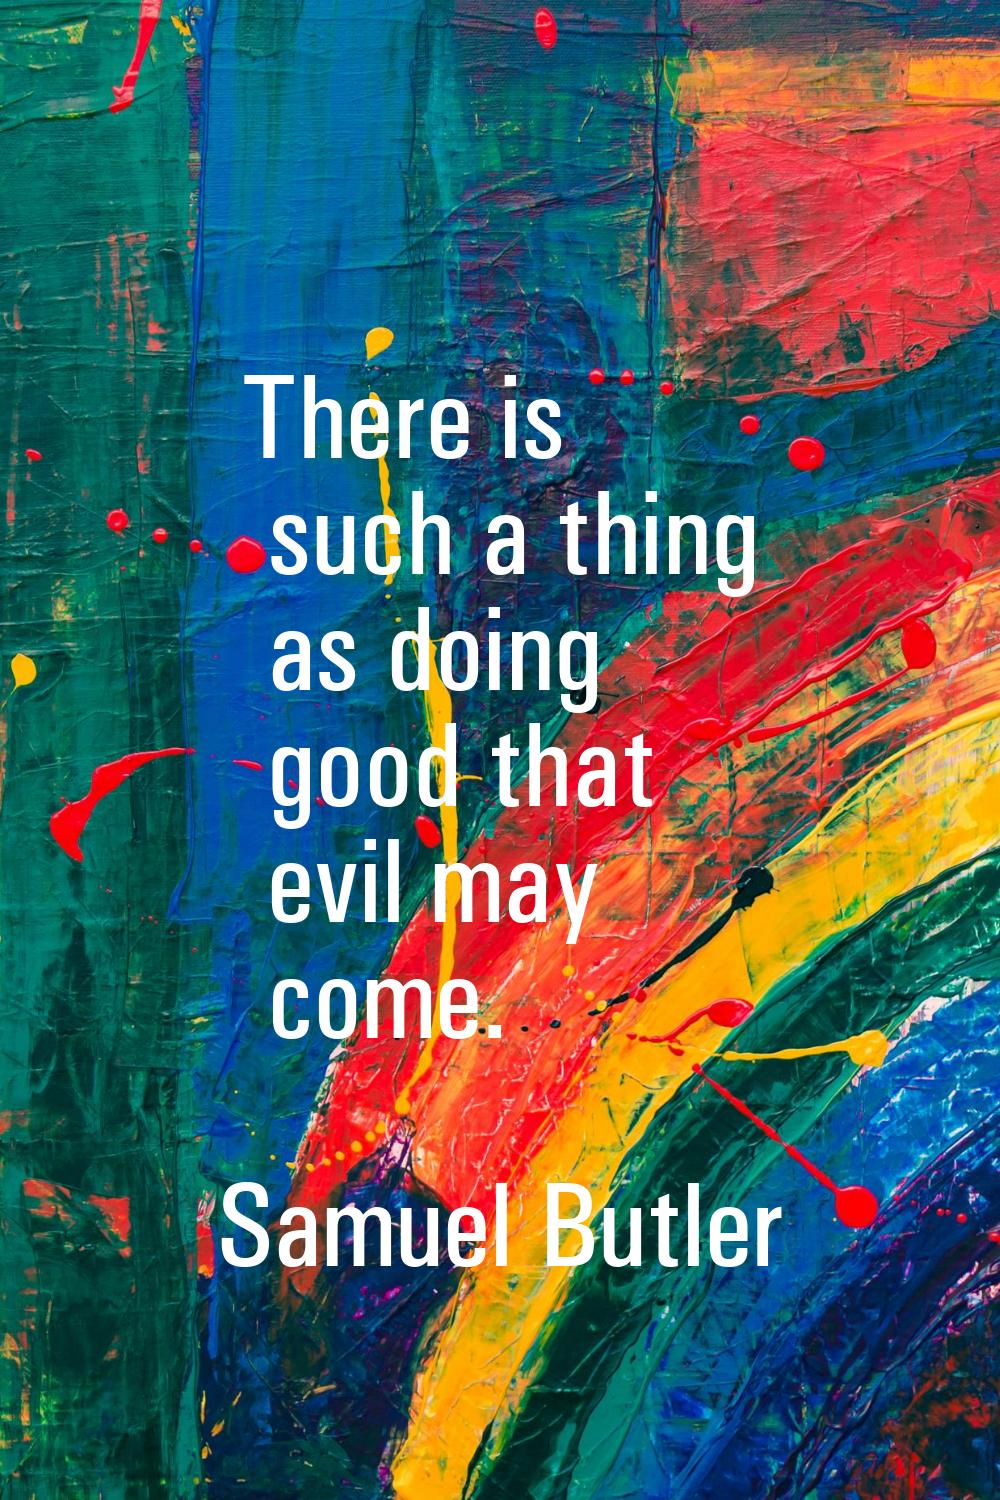 There is such a thing as doing good that evil may come.